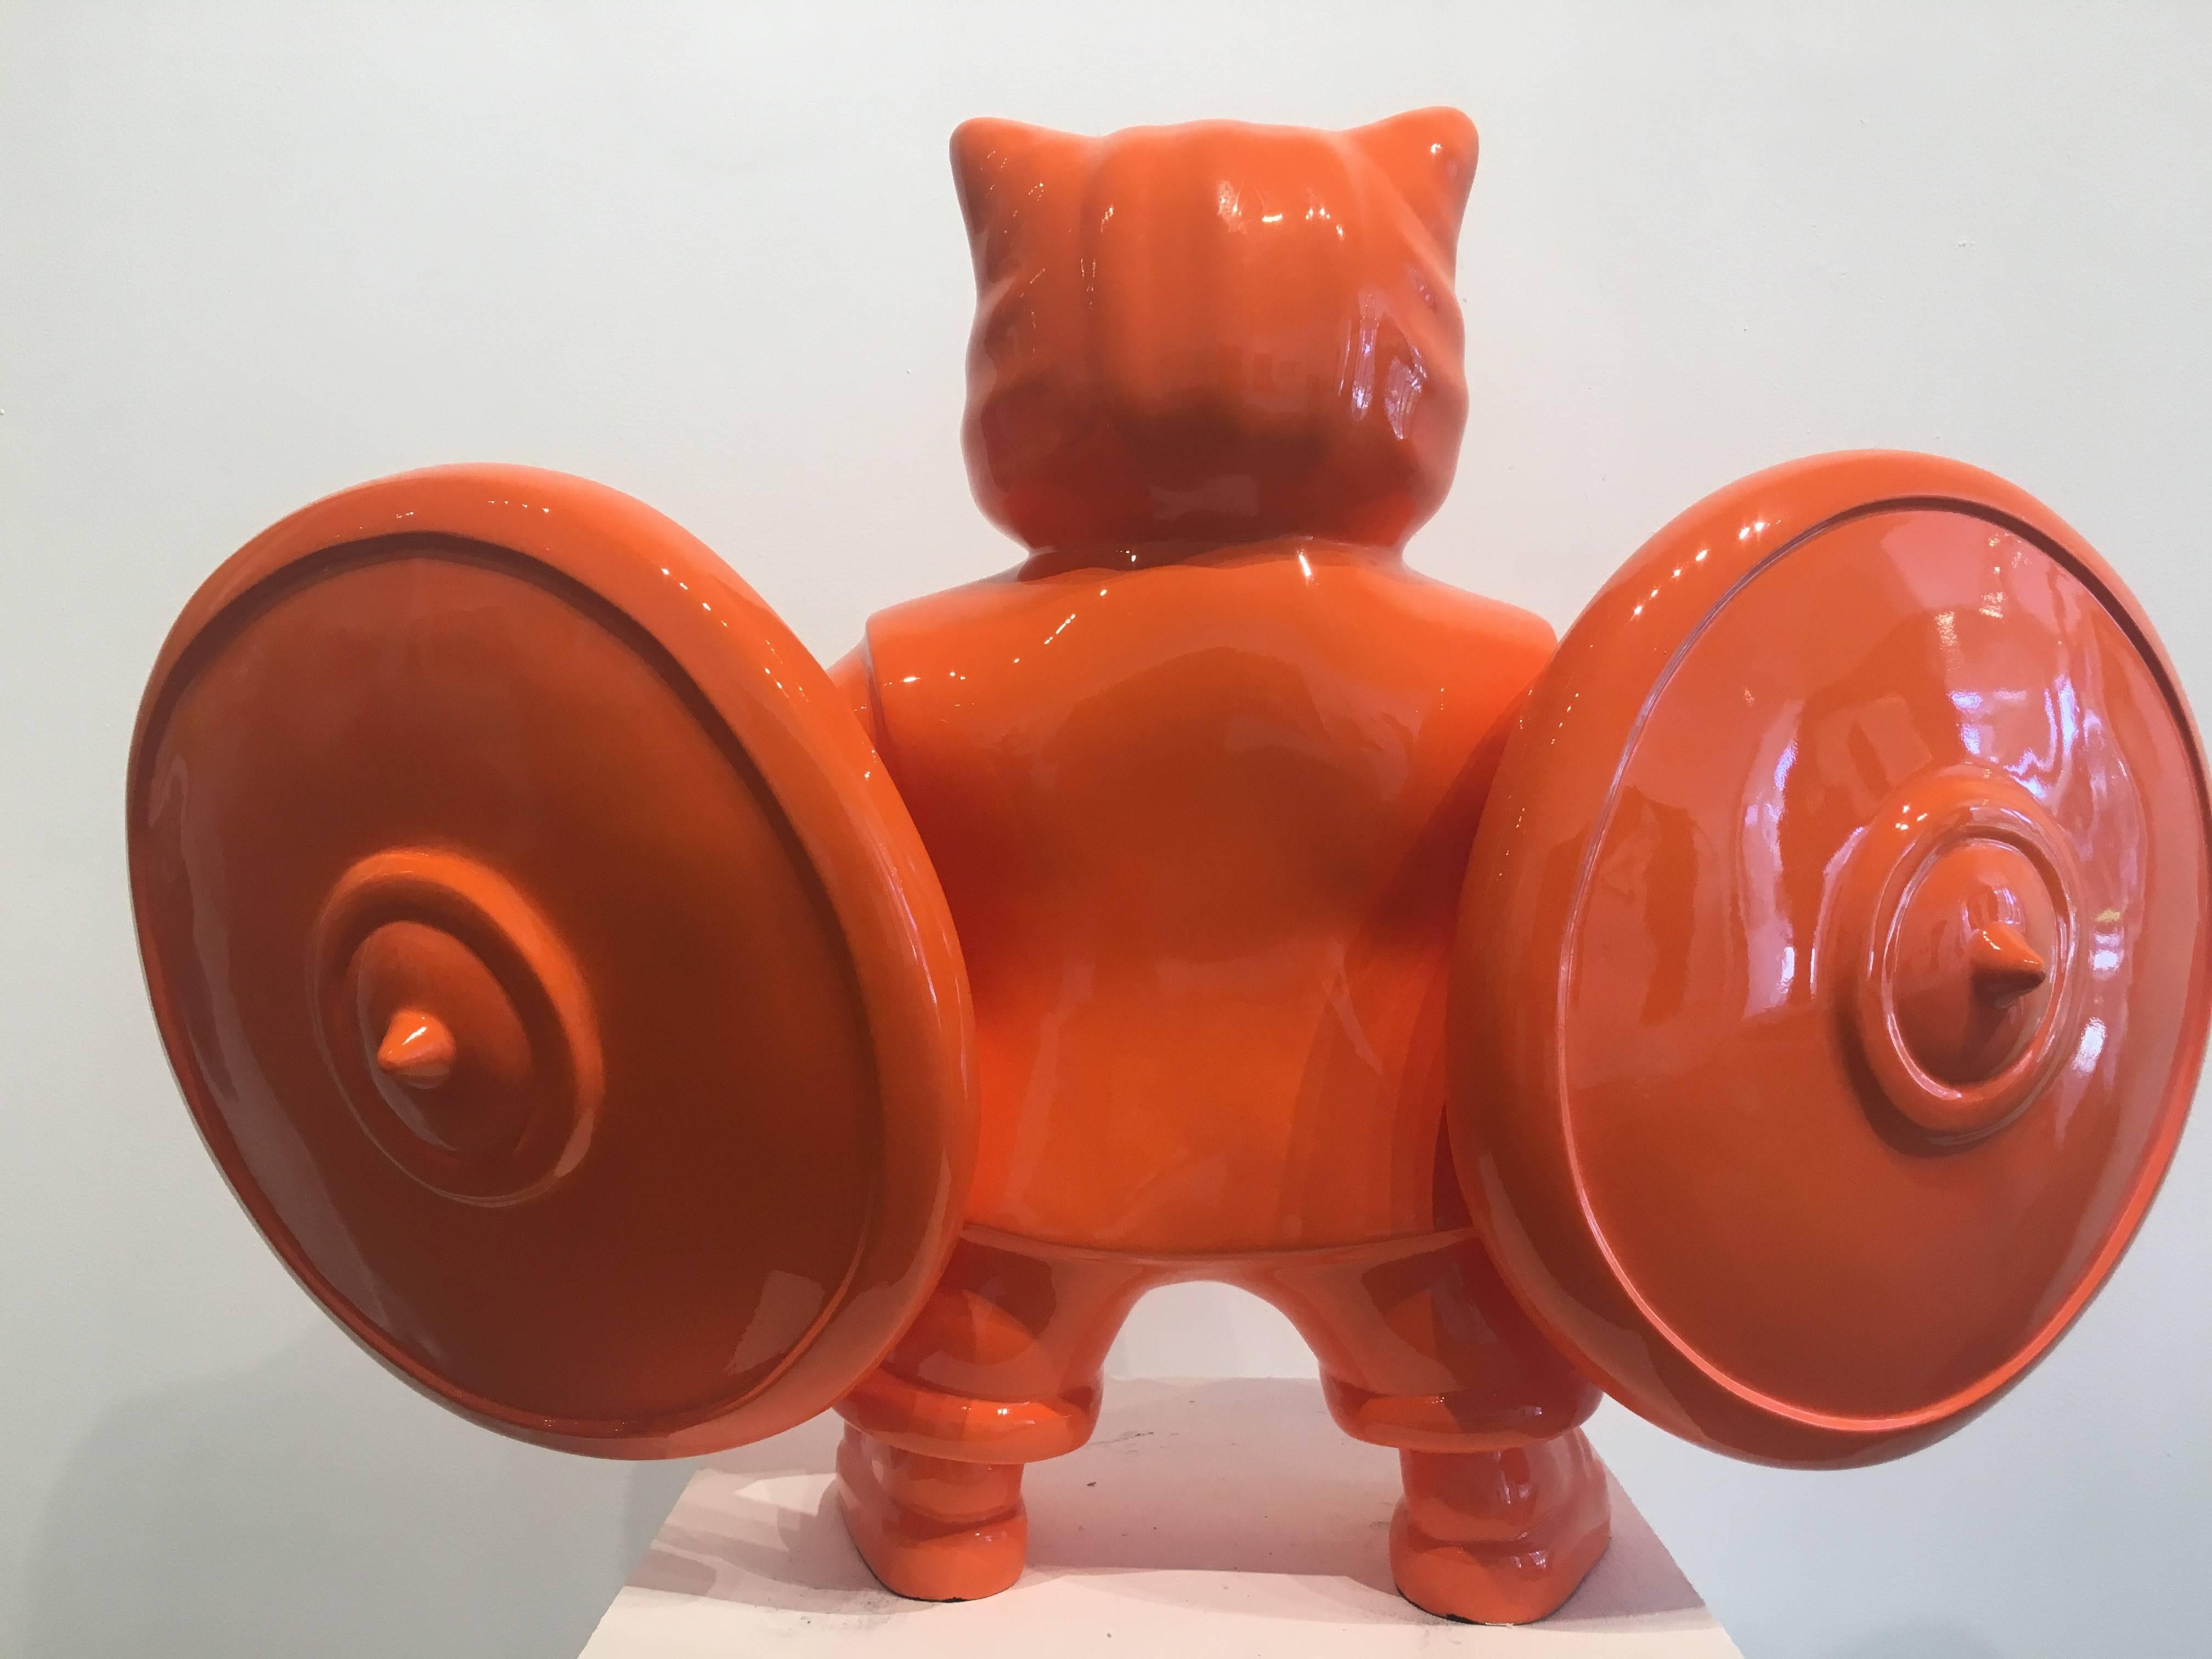 WARRIORCAT ORANGE - Abstract Expressionist Sculpture by HIRO ANDO